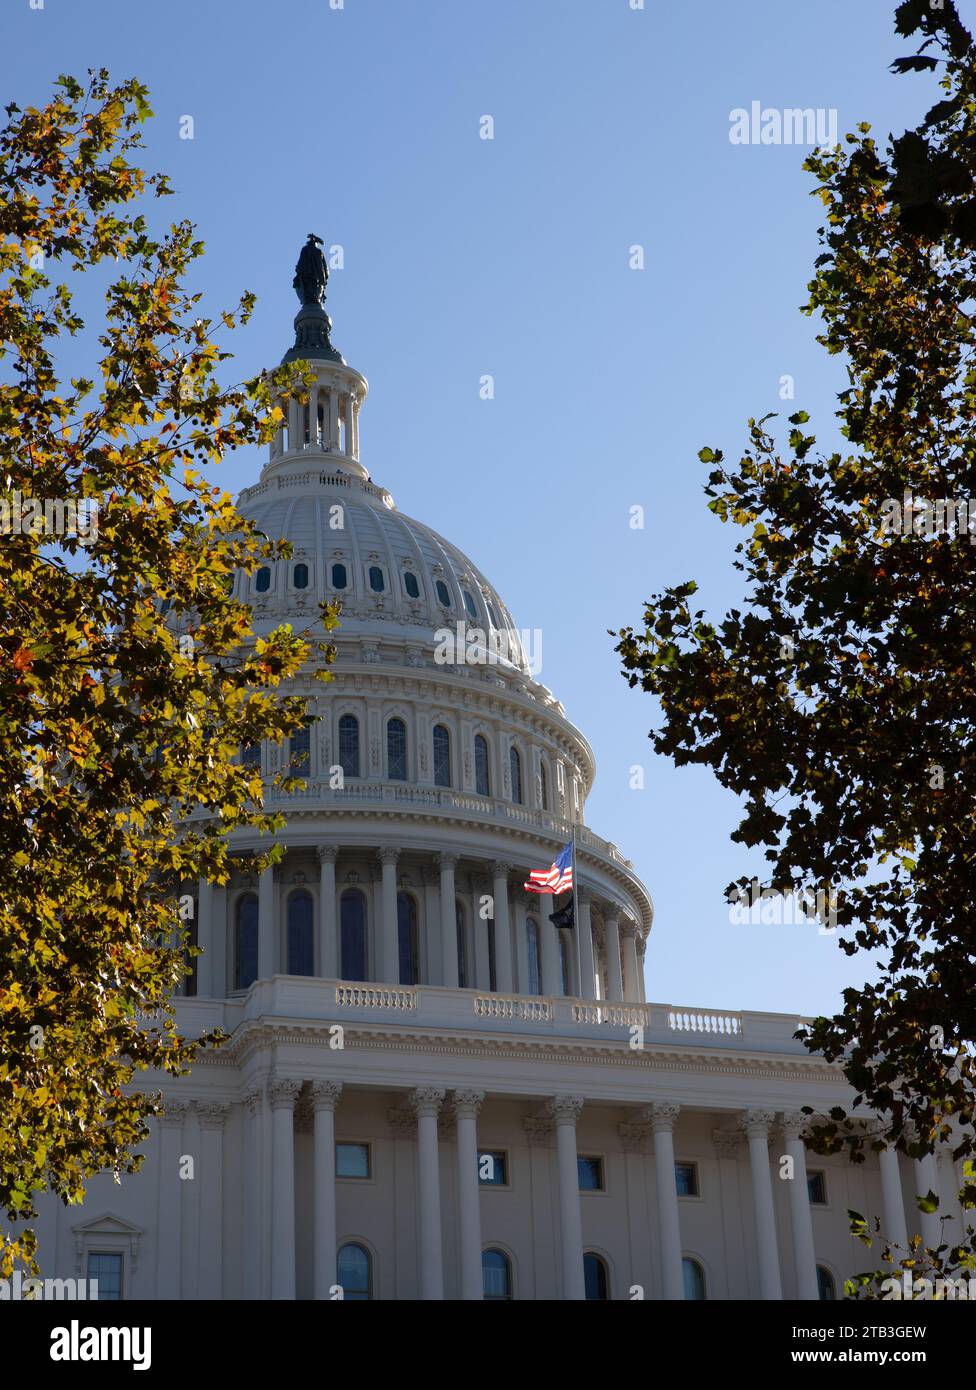 The US Capitol Building in Washington DC which is the seat of the US Congress situated in the US Capital, Washington DC, USA. Stock Photo